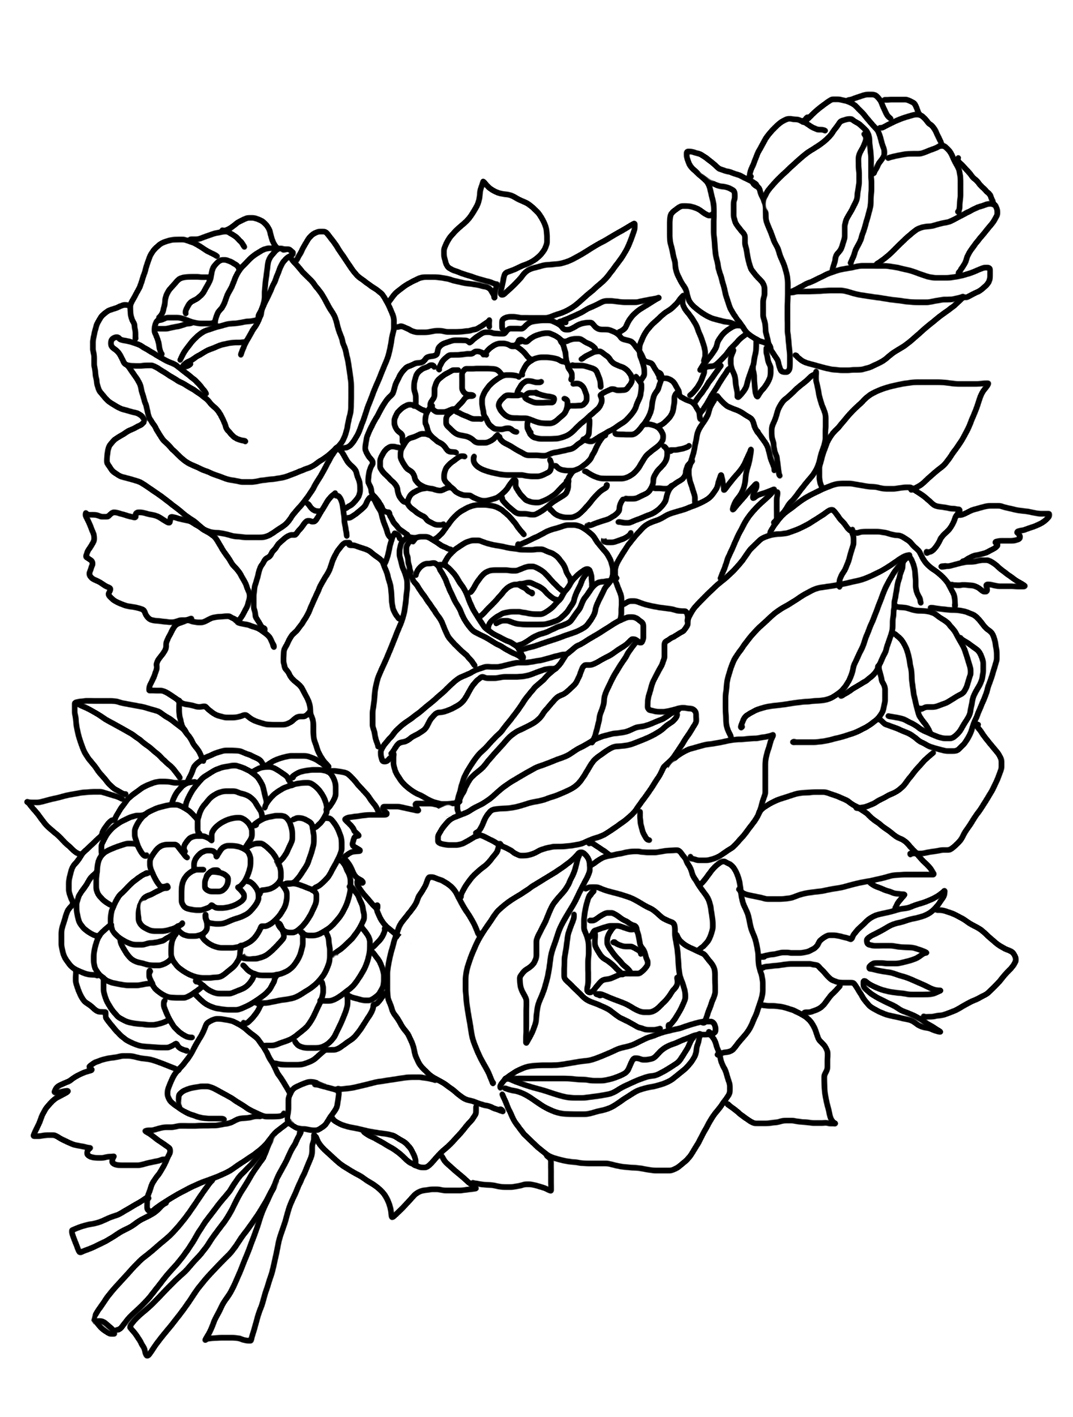 Download Flower Coloring Pages